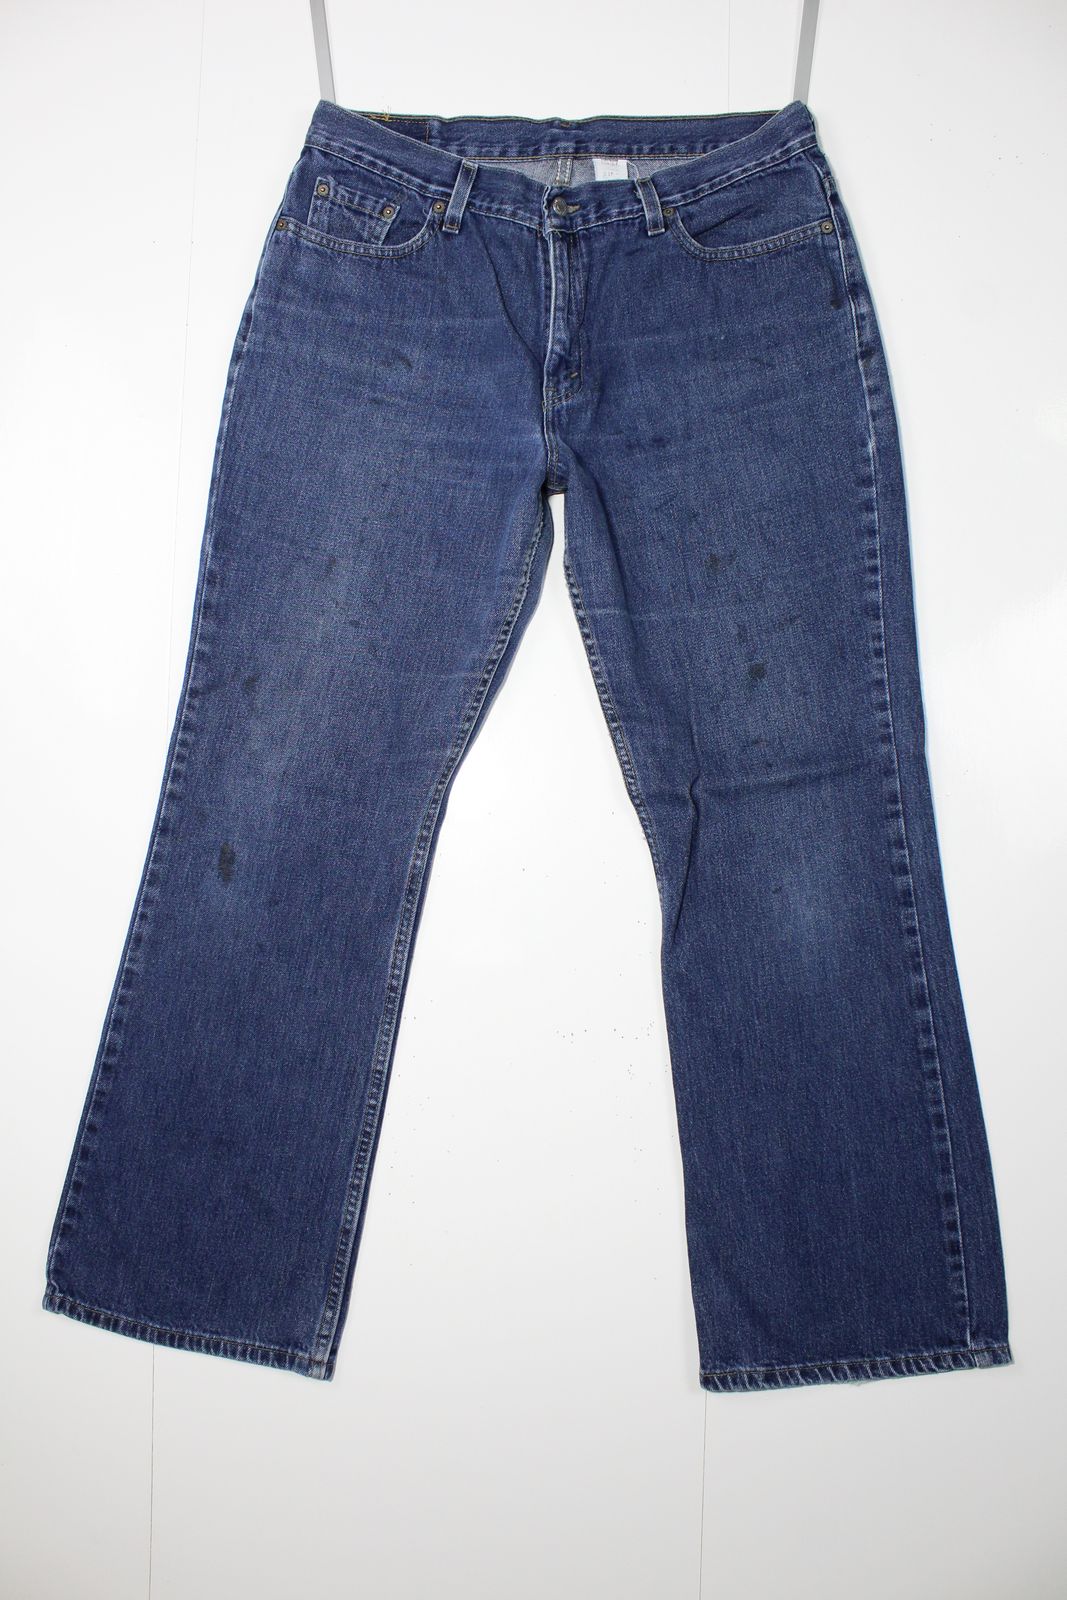 Levi's 515 Bootcut Made In USA Taglia 16 Jeans Vintage